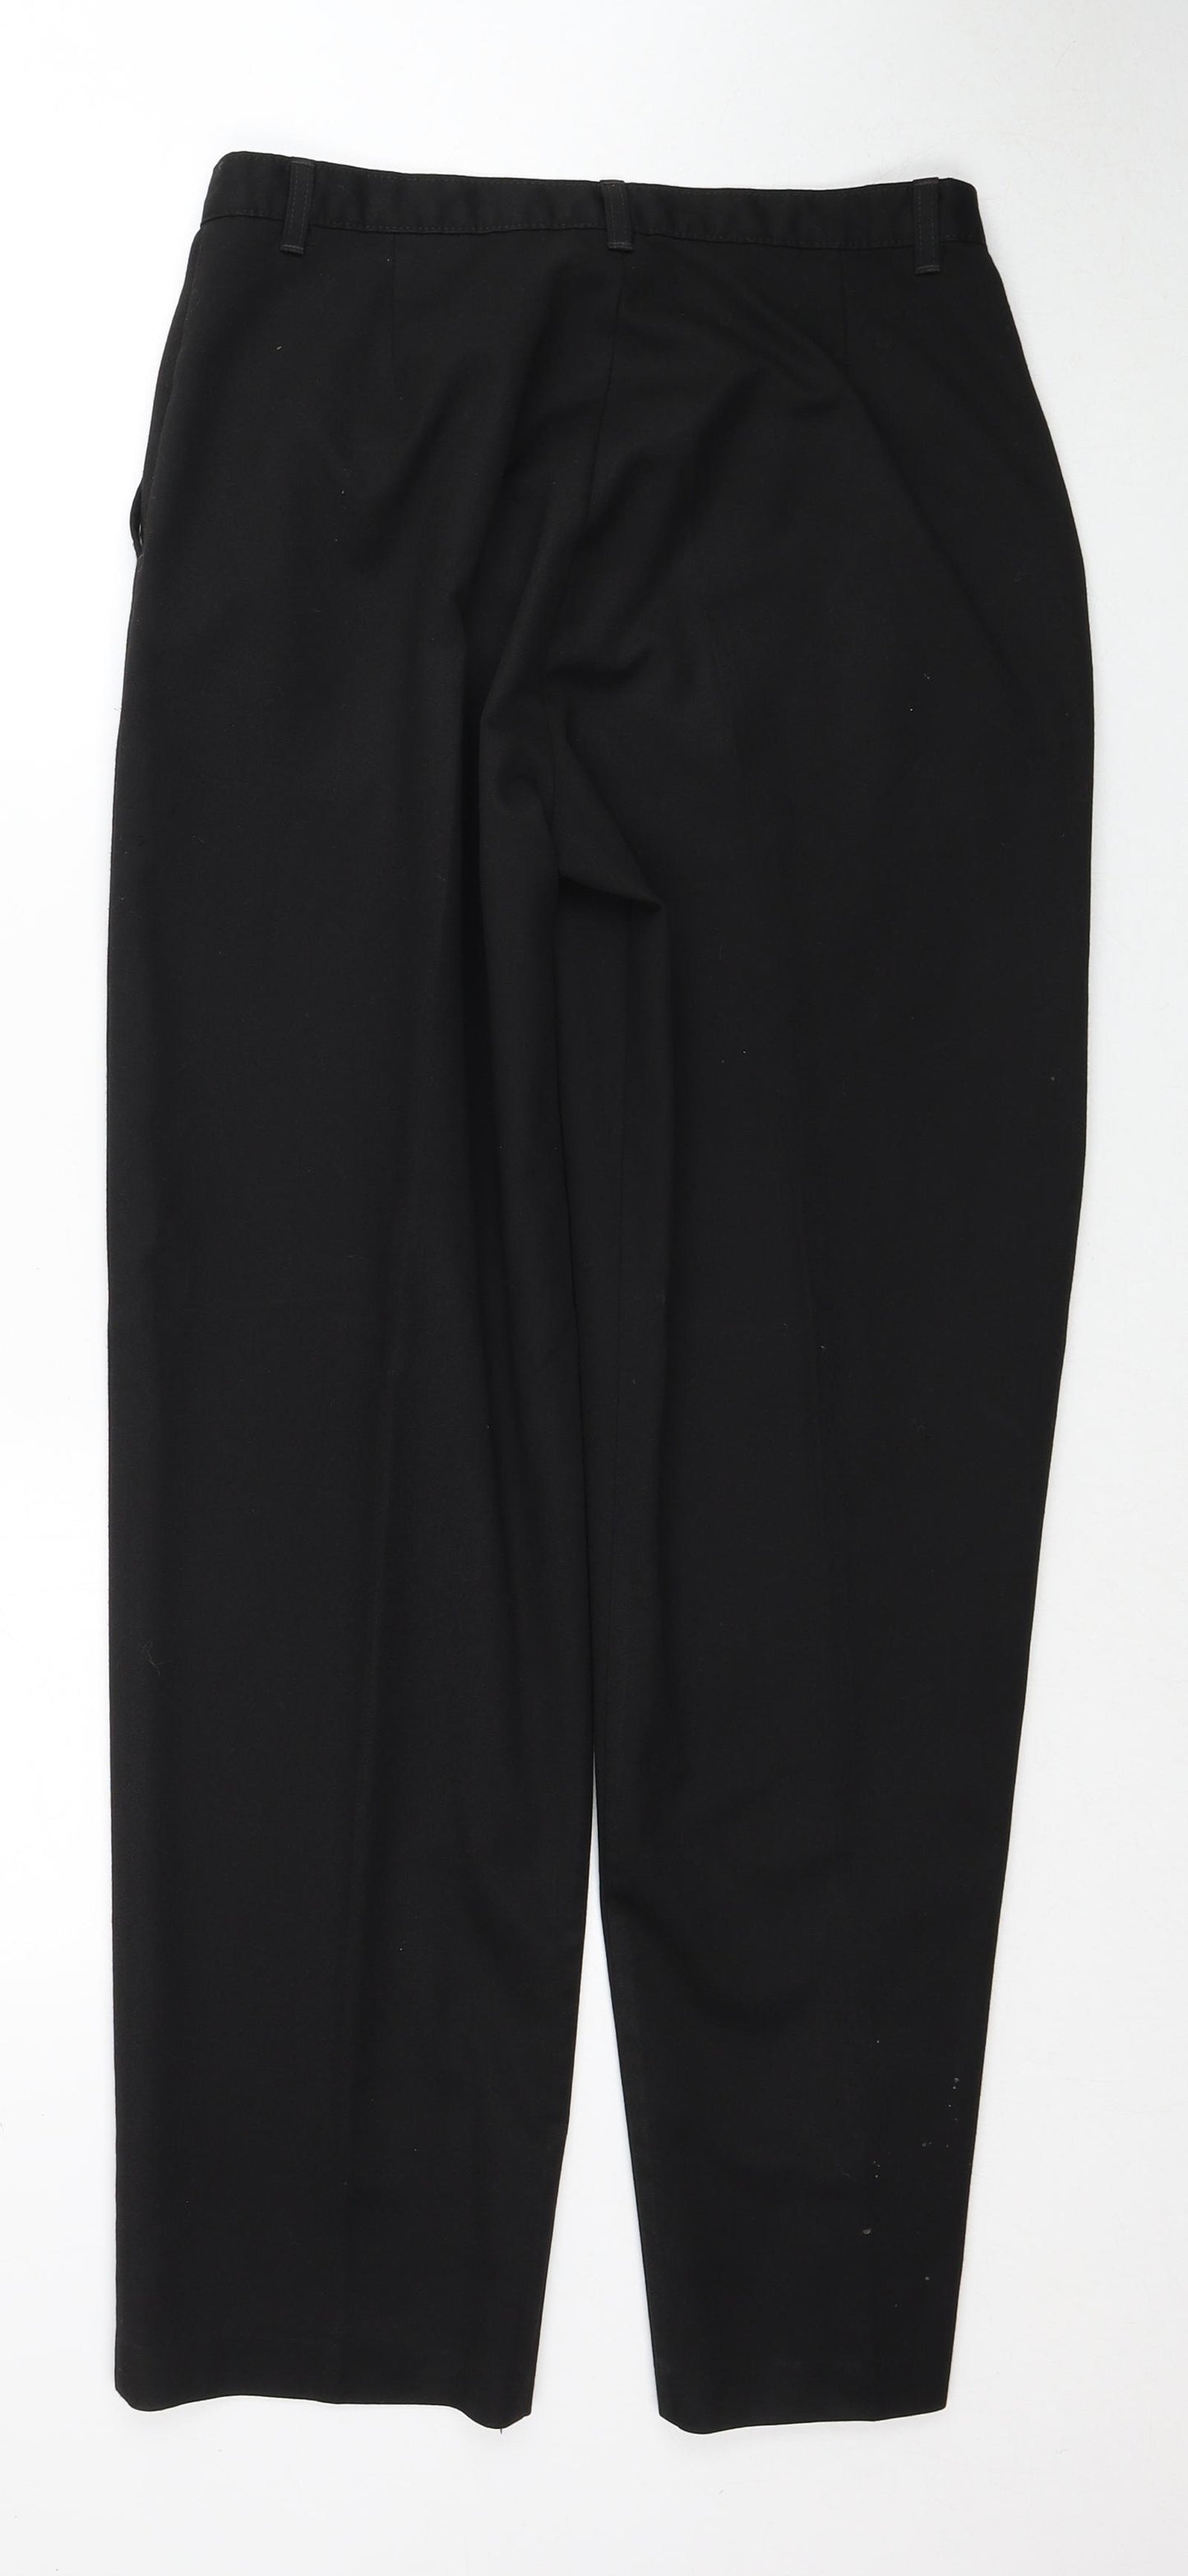 Marks and Spencer Boys Black Polyester Chino Trousers Size 15 Years Regular Zip